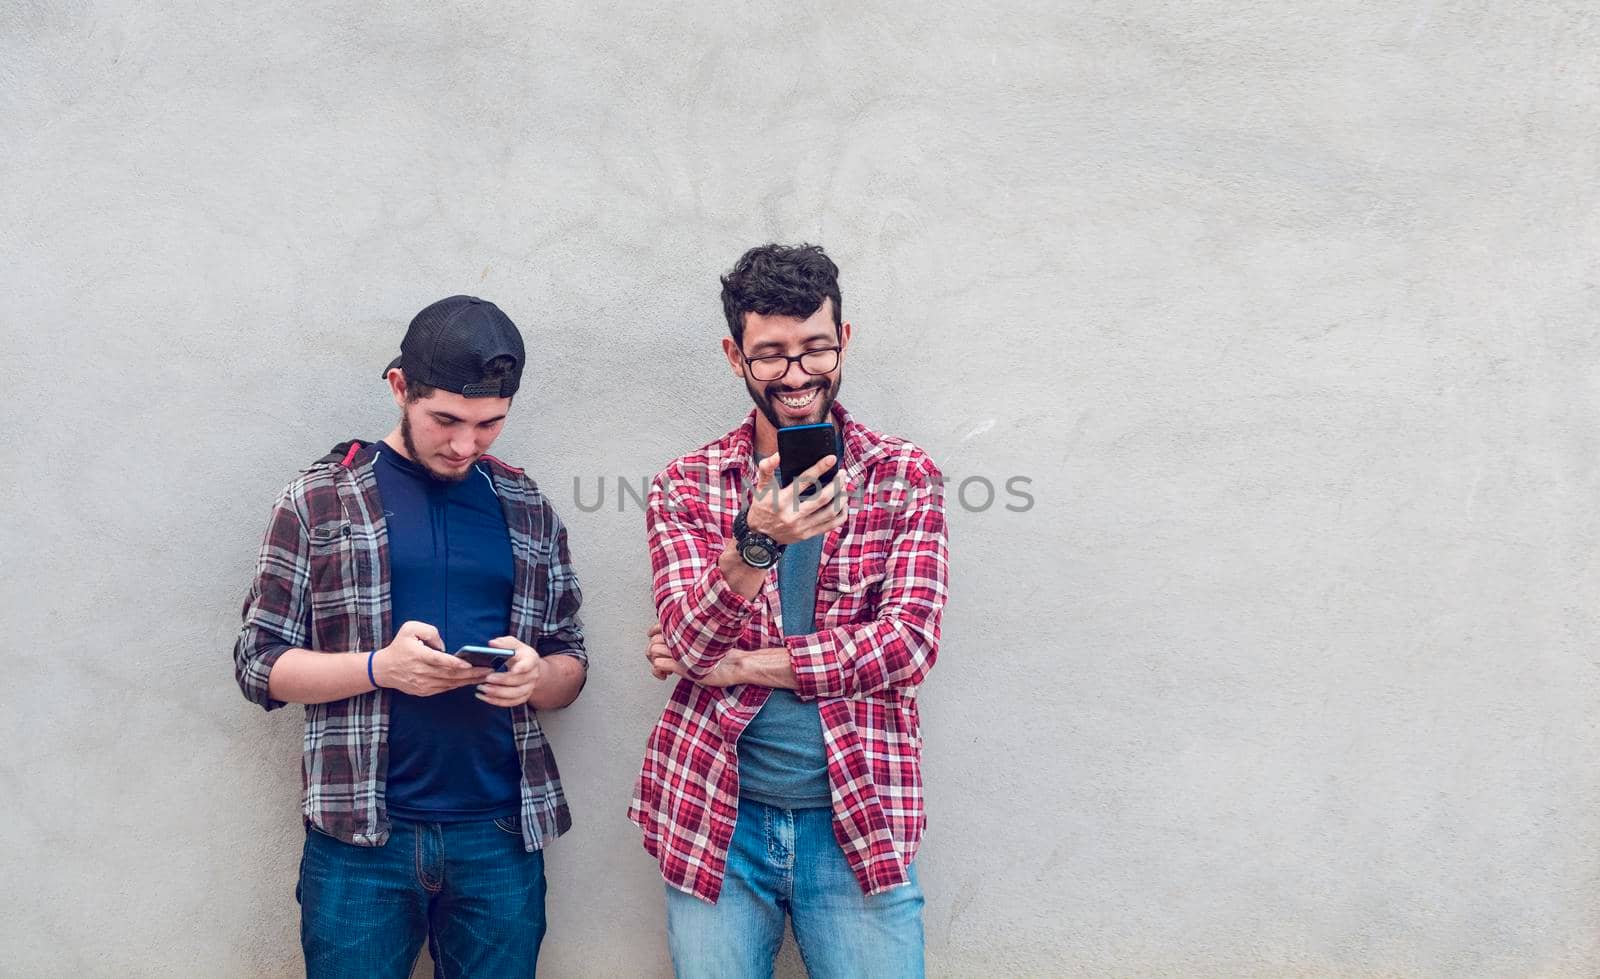 Smiling guys checking their cellphones, Smiling handsome young men checking their cellphones, Two guys enjoying their cellphone